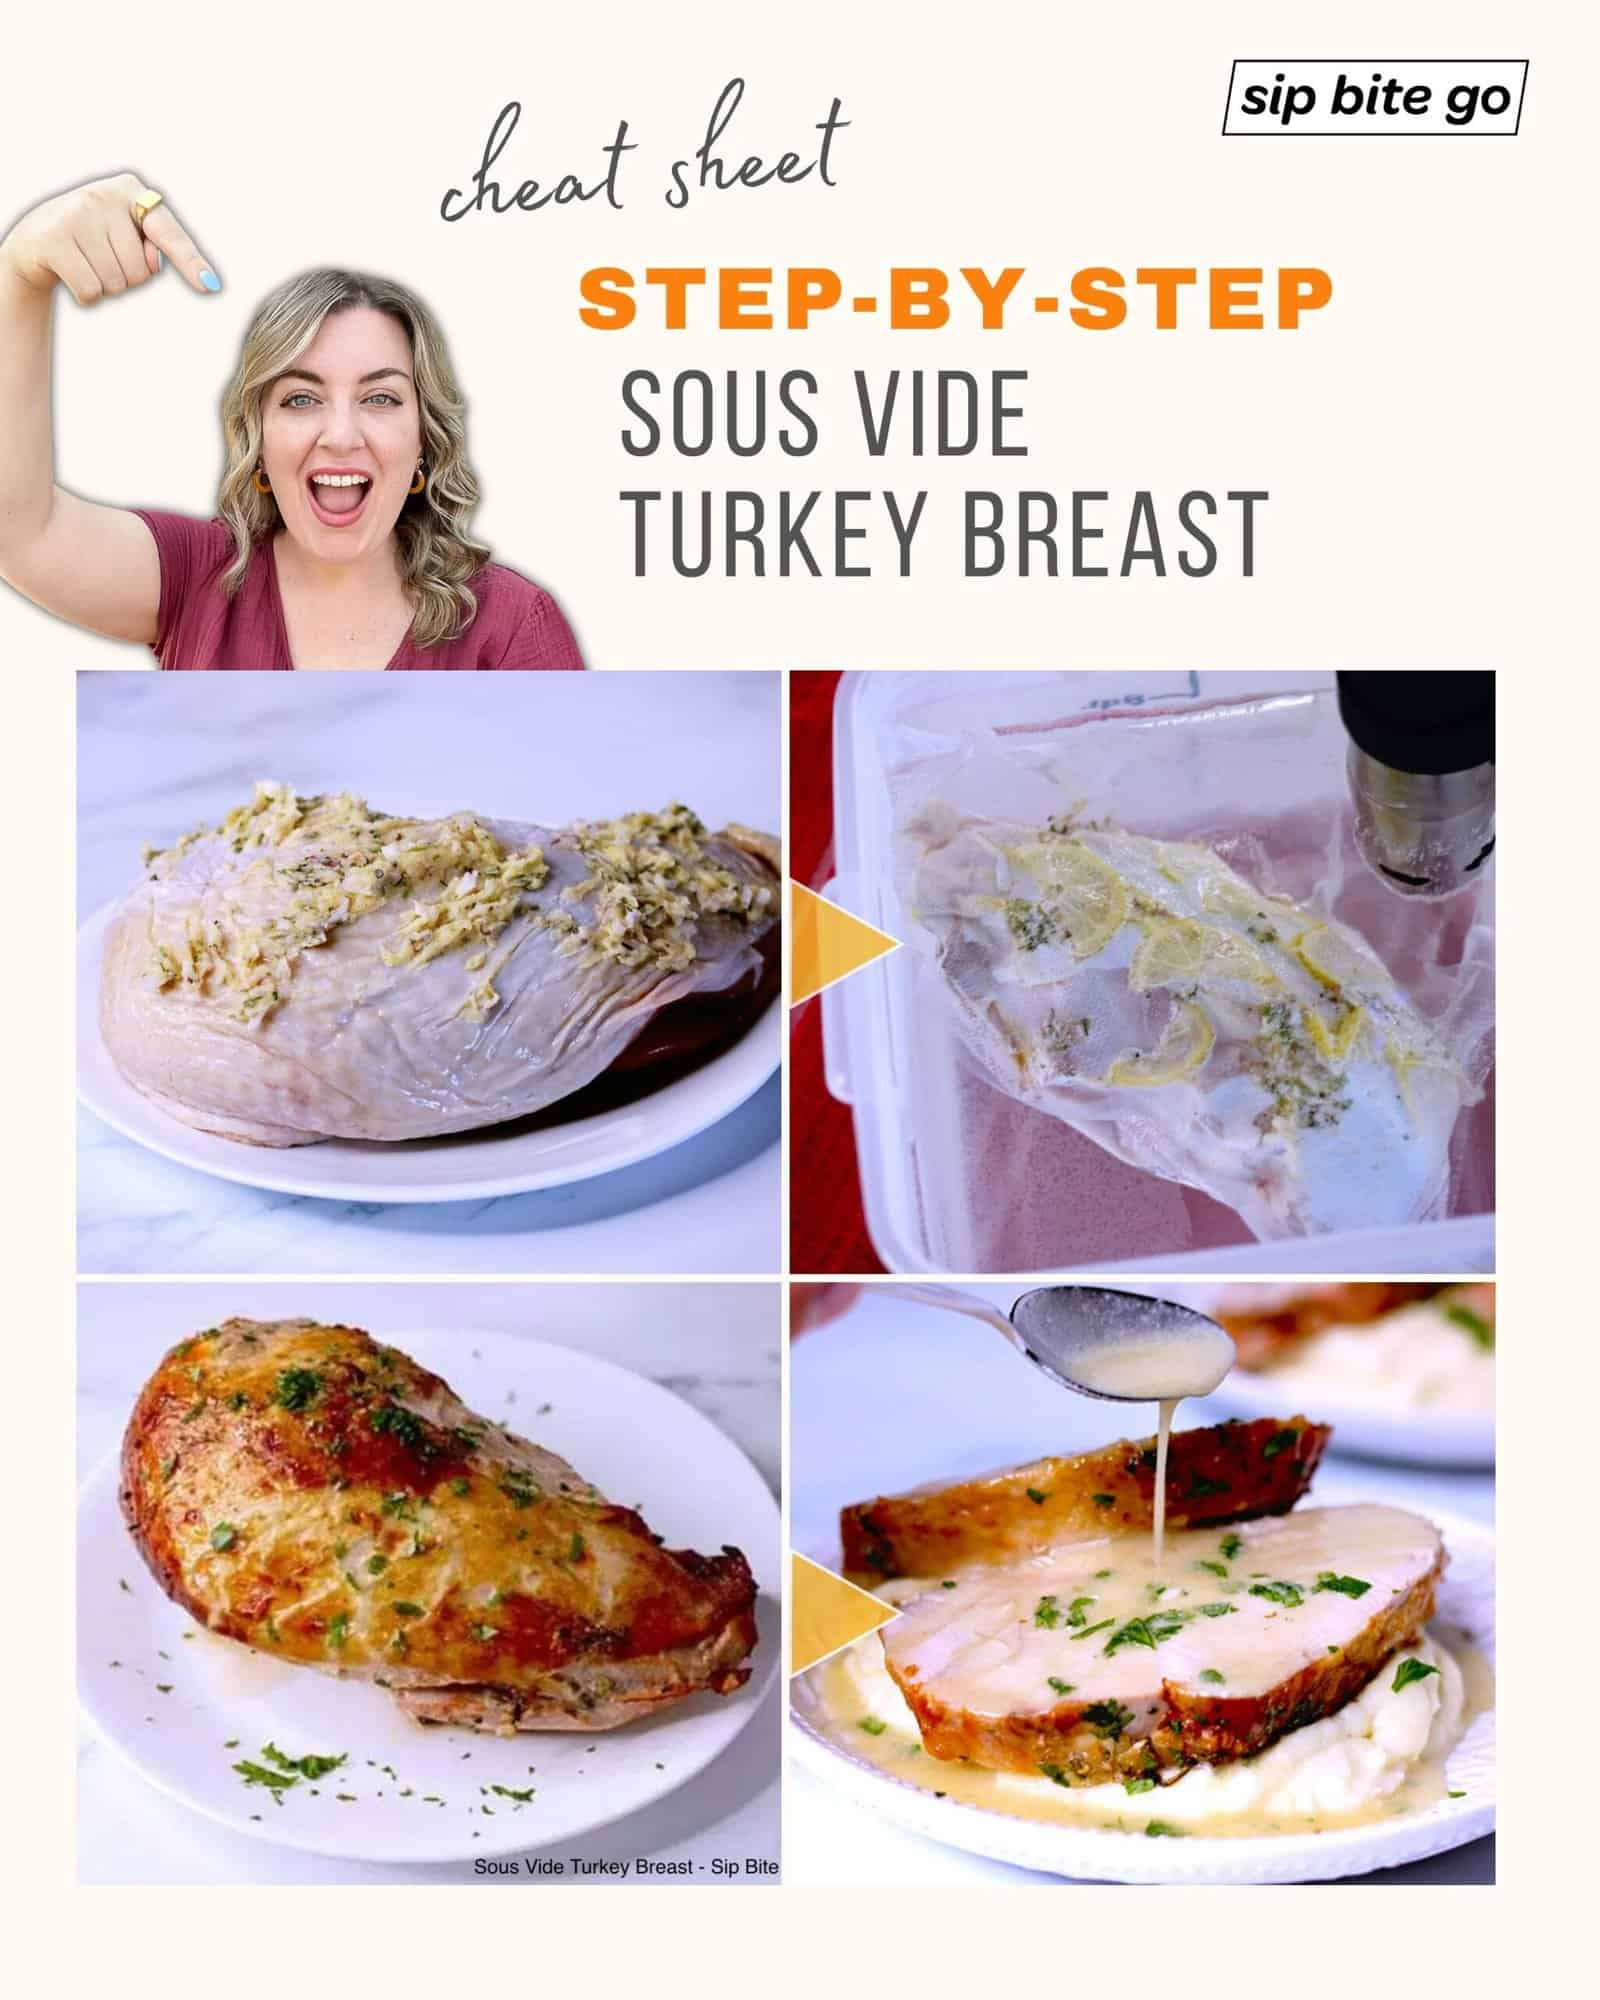 https://sipbitego.com/wp-content/uploads/2023/11/Infographic-with-step-by-step-recipe-guide-for-sous-vide-cooking-turkey-breast-with-text-caption-and-Jenna-Passaro-and-Sip-Bite-Go-logo-scaled.jpg